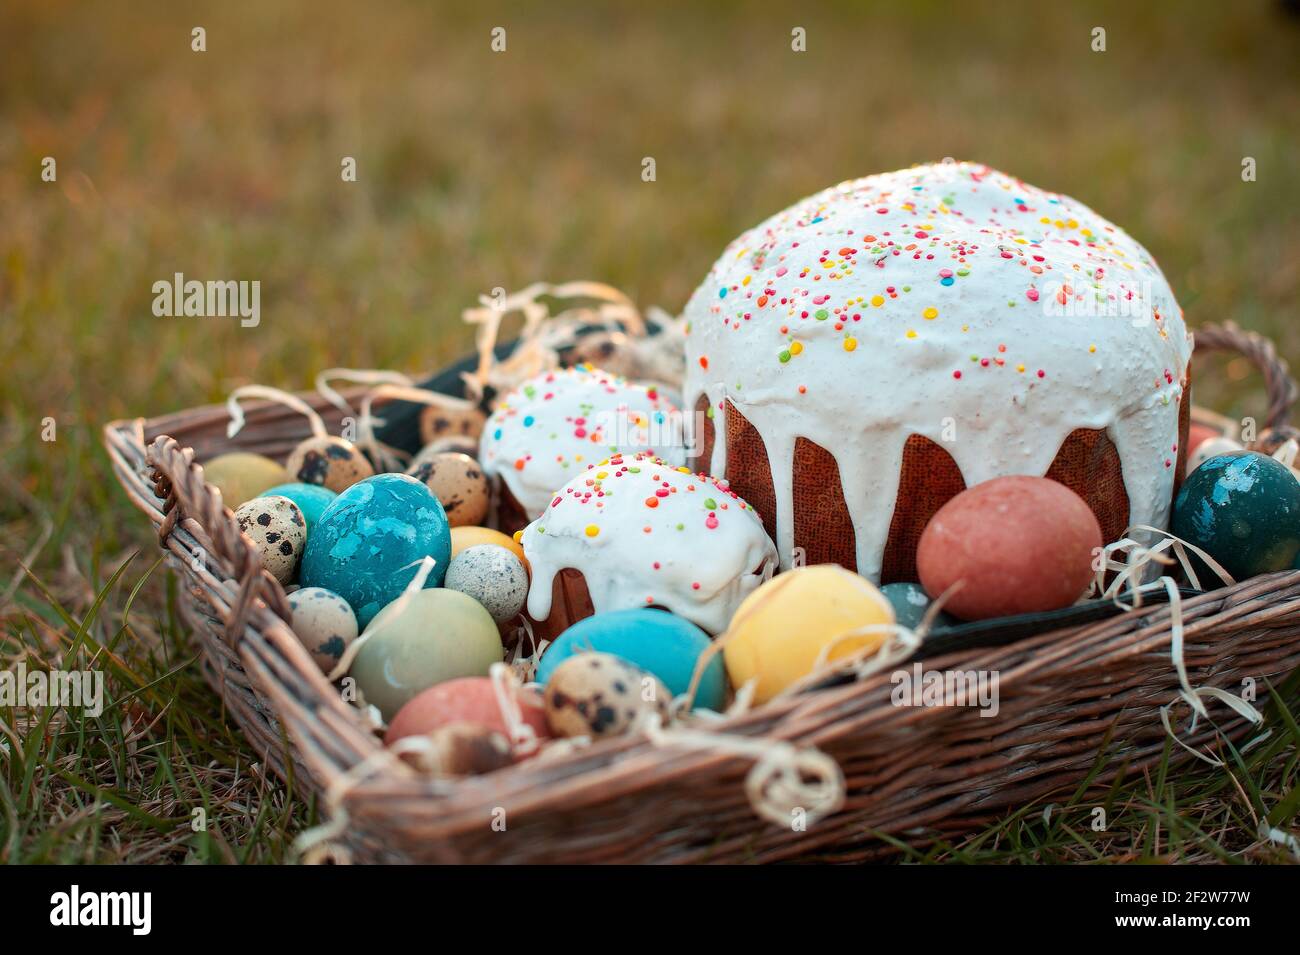 Wicker basket with Easter cake and eggs on green grass background Stock Photo